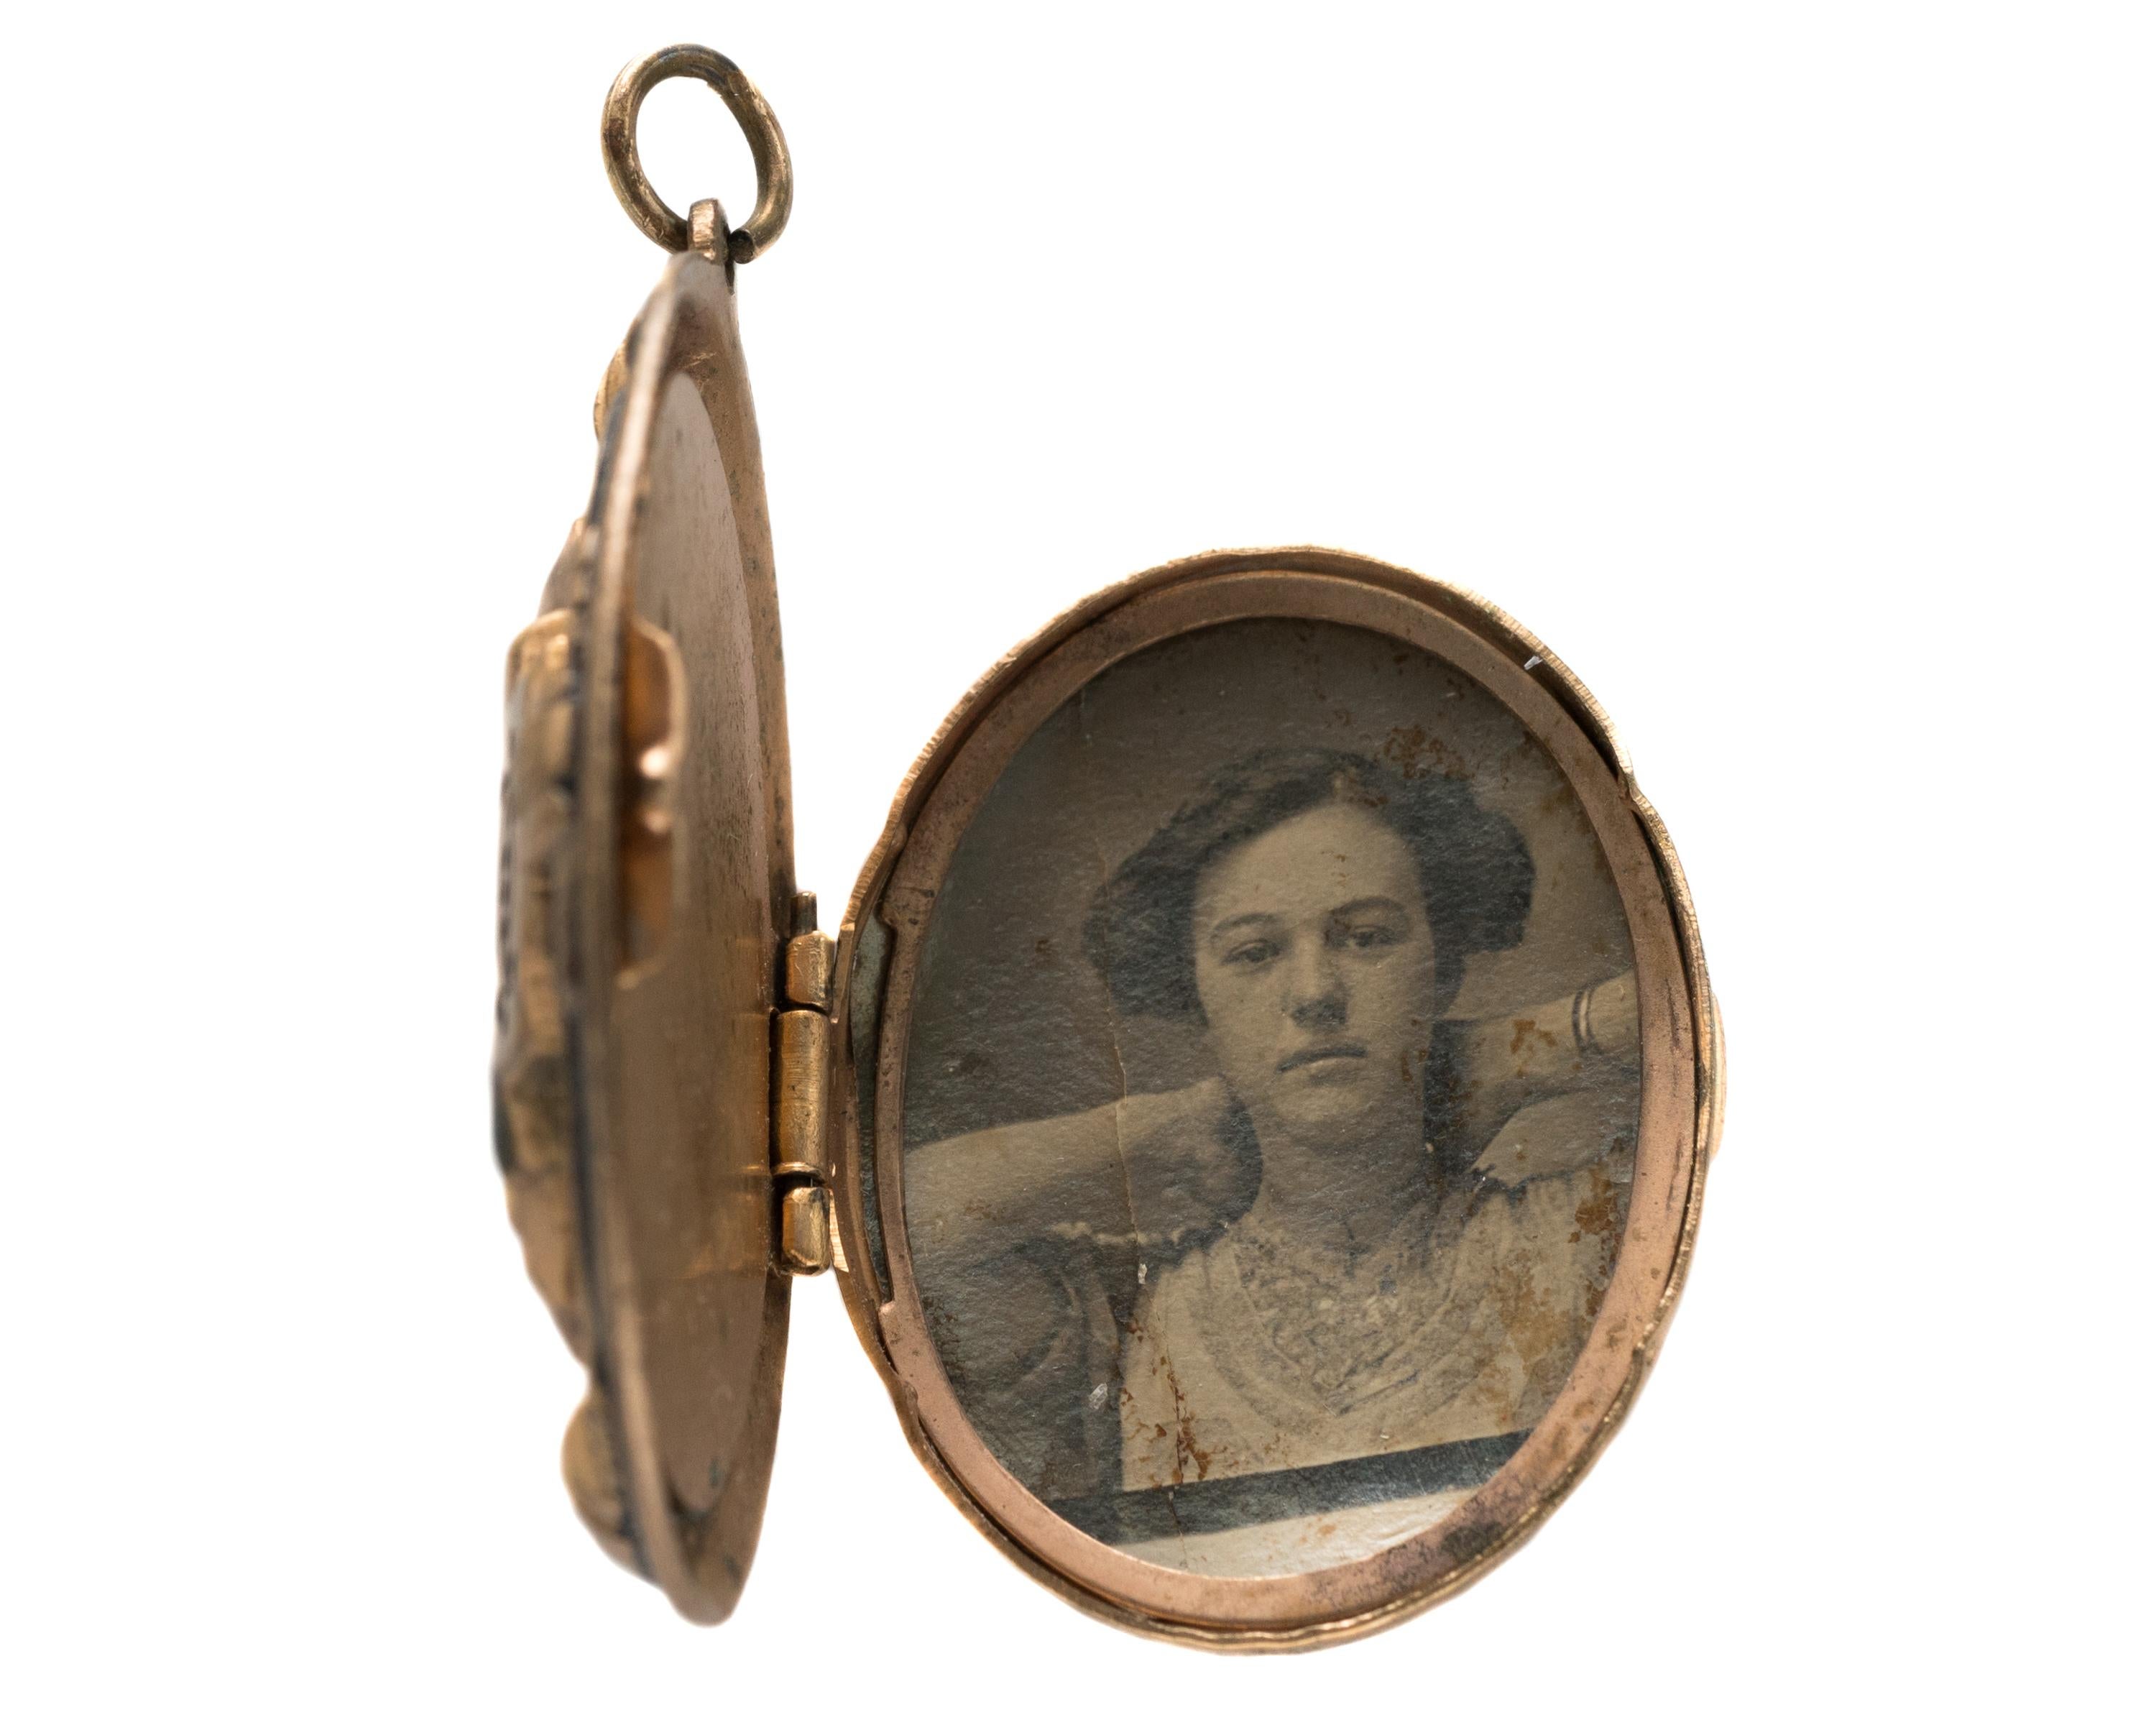 Antique Victorian Locket - 10 Karat Yellow Gold

Features: 
Intricately Detailed Design on front
Hinged and Opens
Portrait of a Young Woman inside
Snaps closed
Measures 1.5 x 1.25 inches, 8.5 millimeter thick

Locket Details:
Measures 1.5 x 1.25